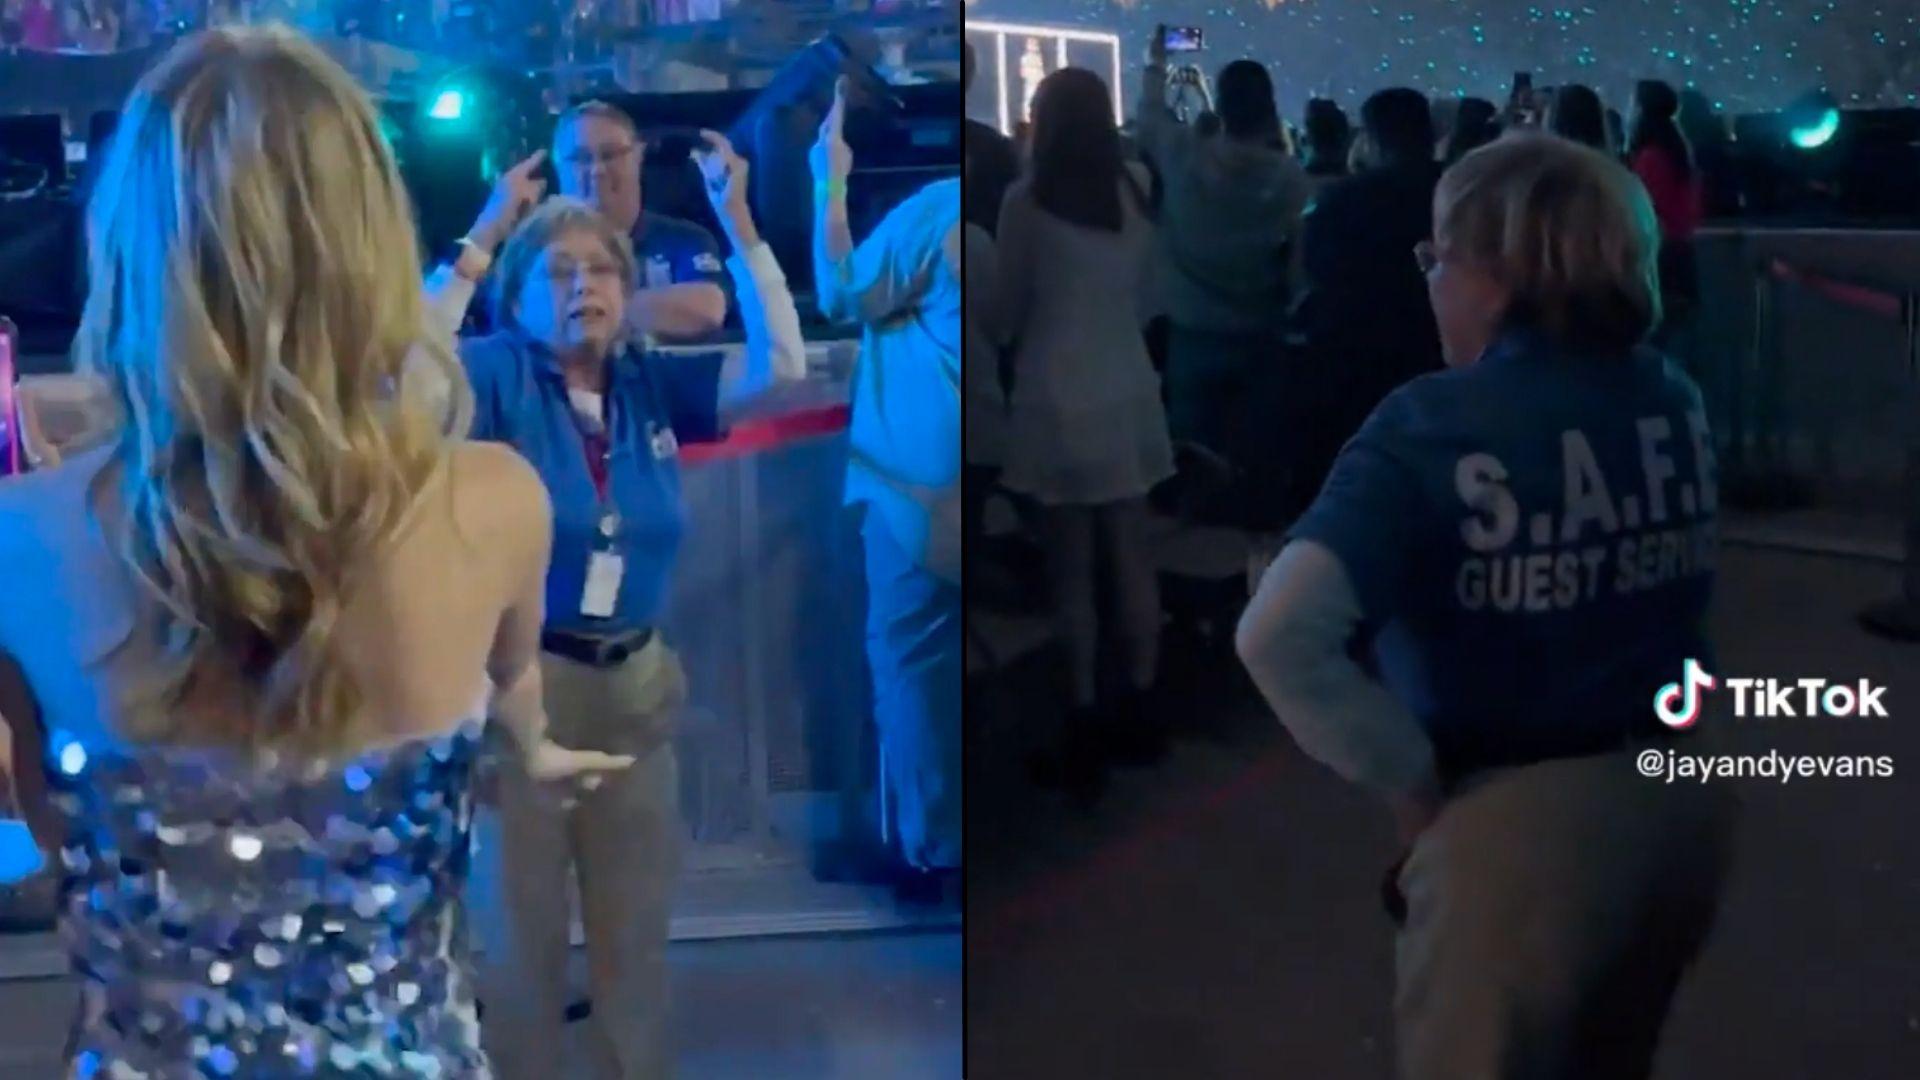 Security guard in blue shirt dancing with Taylor Swift fans at concert